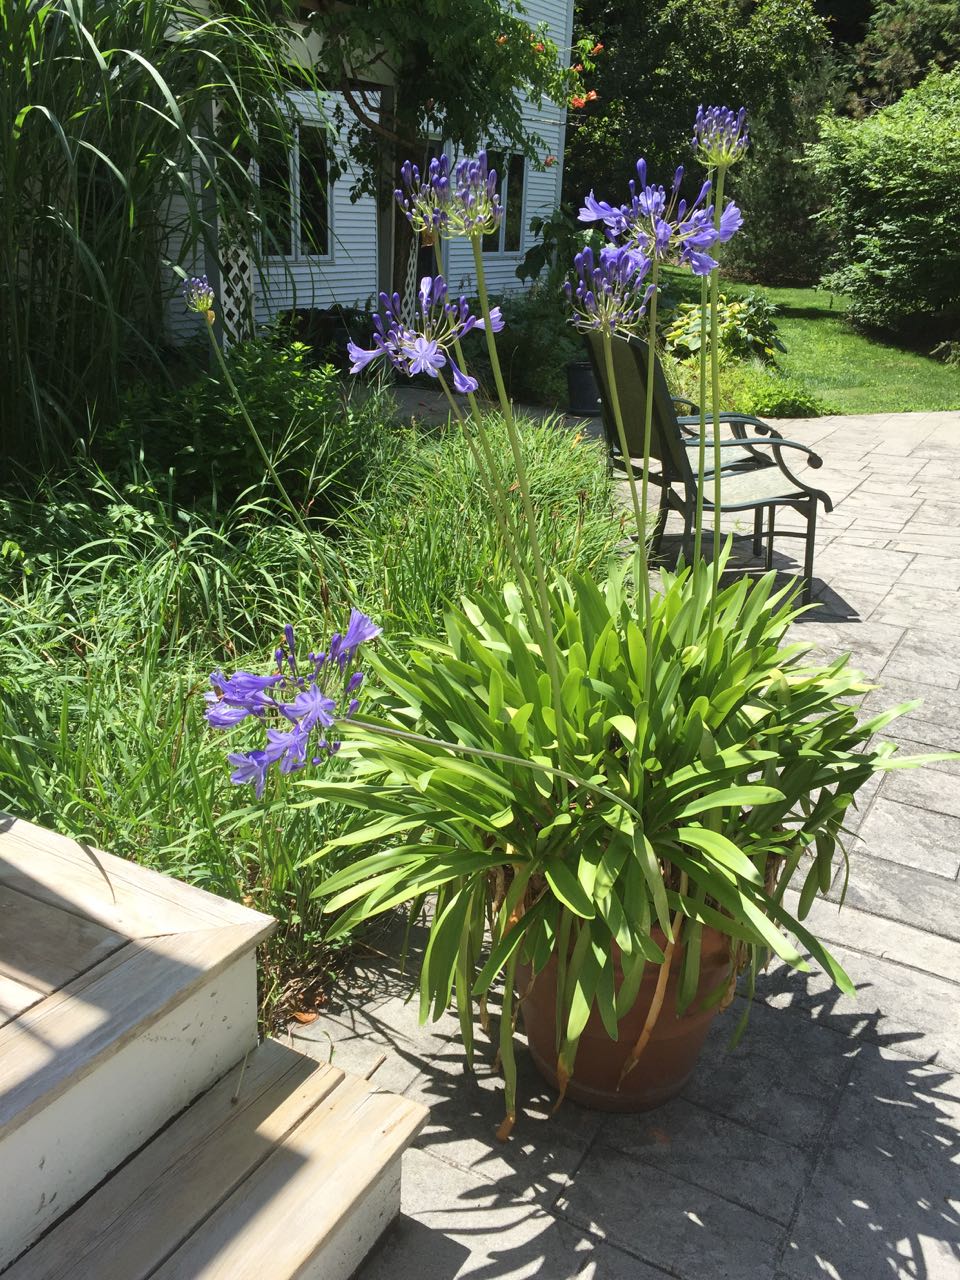 I bought this agapanthus in a 5-gallon bucket at least 10 years ago! It is now split into two large terra-cotta pots, and will probably have to be divided again this winter.